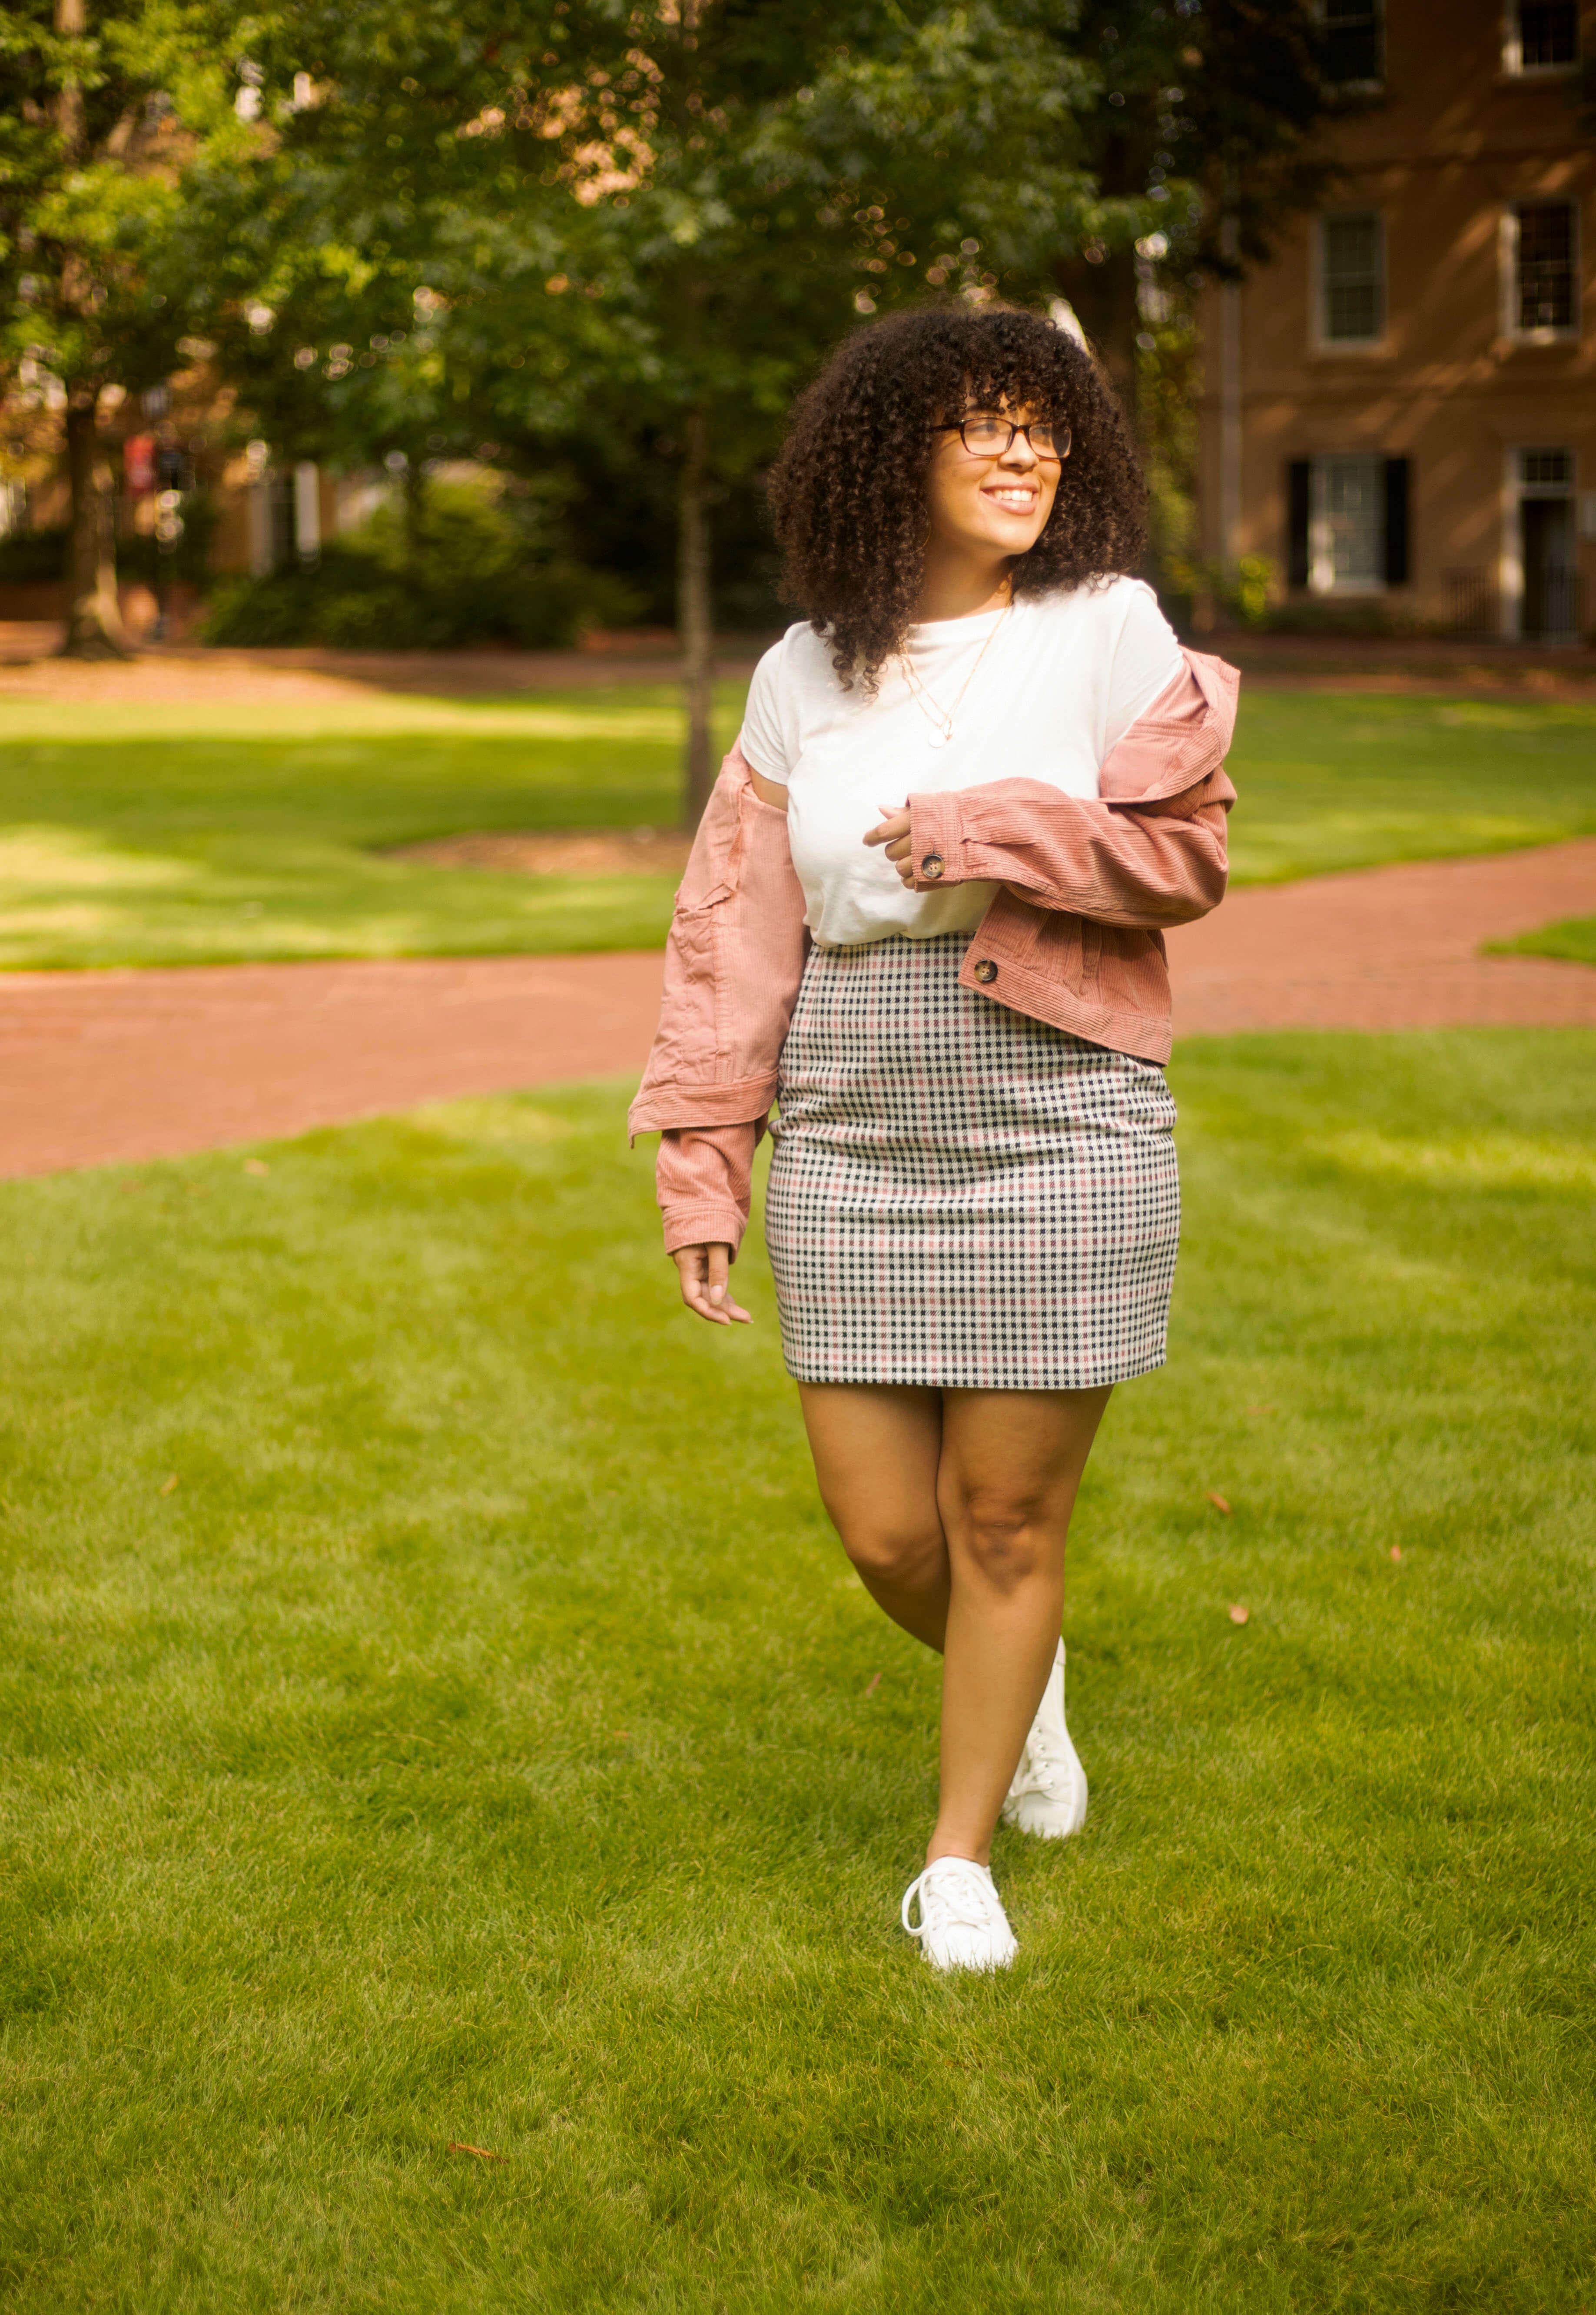 It’s the back to school season and I’ve been obsessing over H&M’s new Cluecless collection. They have some great, affordable pieces that embody the 90s vibes. It’s the best place to shop for trendy pieces on a budget. What are you picking up this back to school season? 